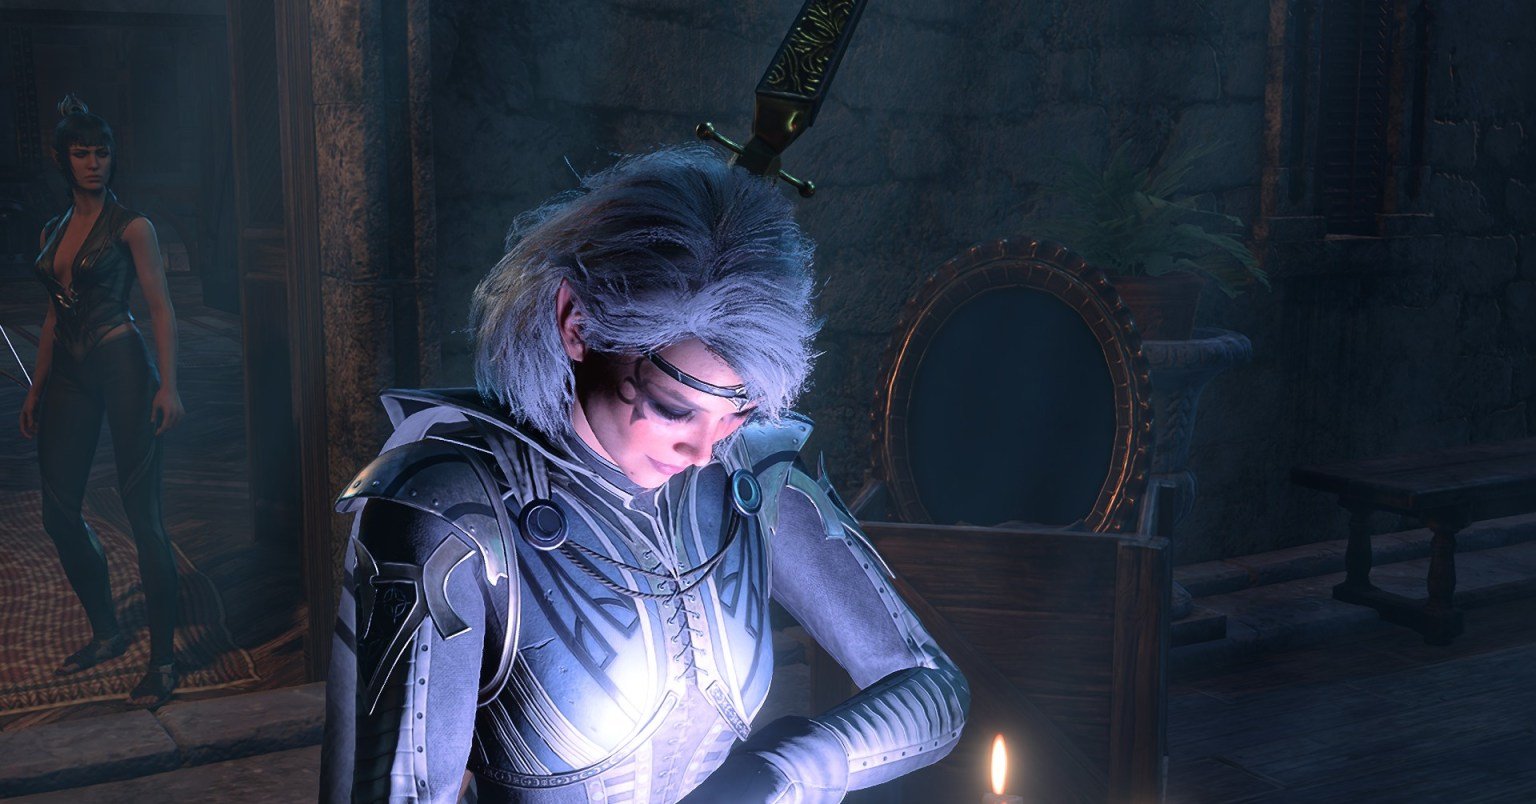 An in game screenshot of Isobel from BG3